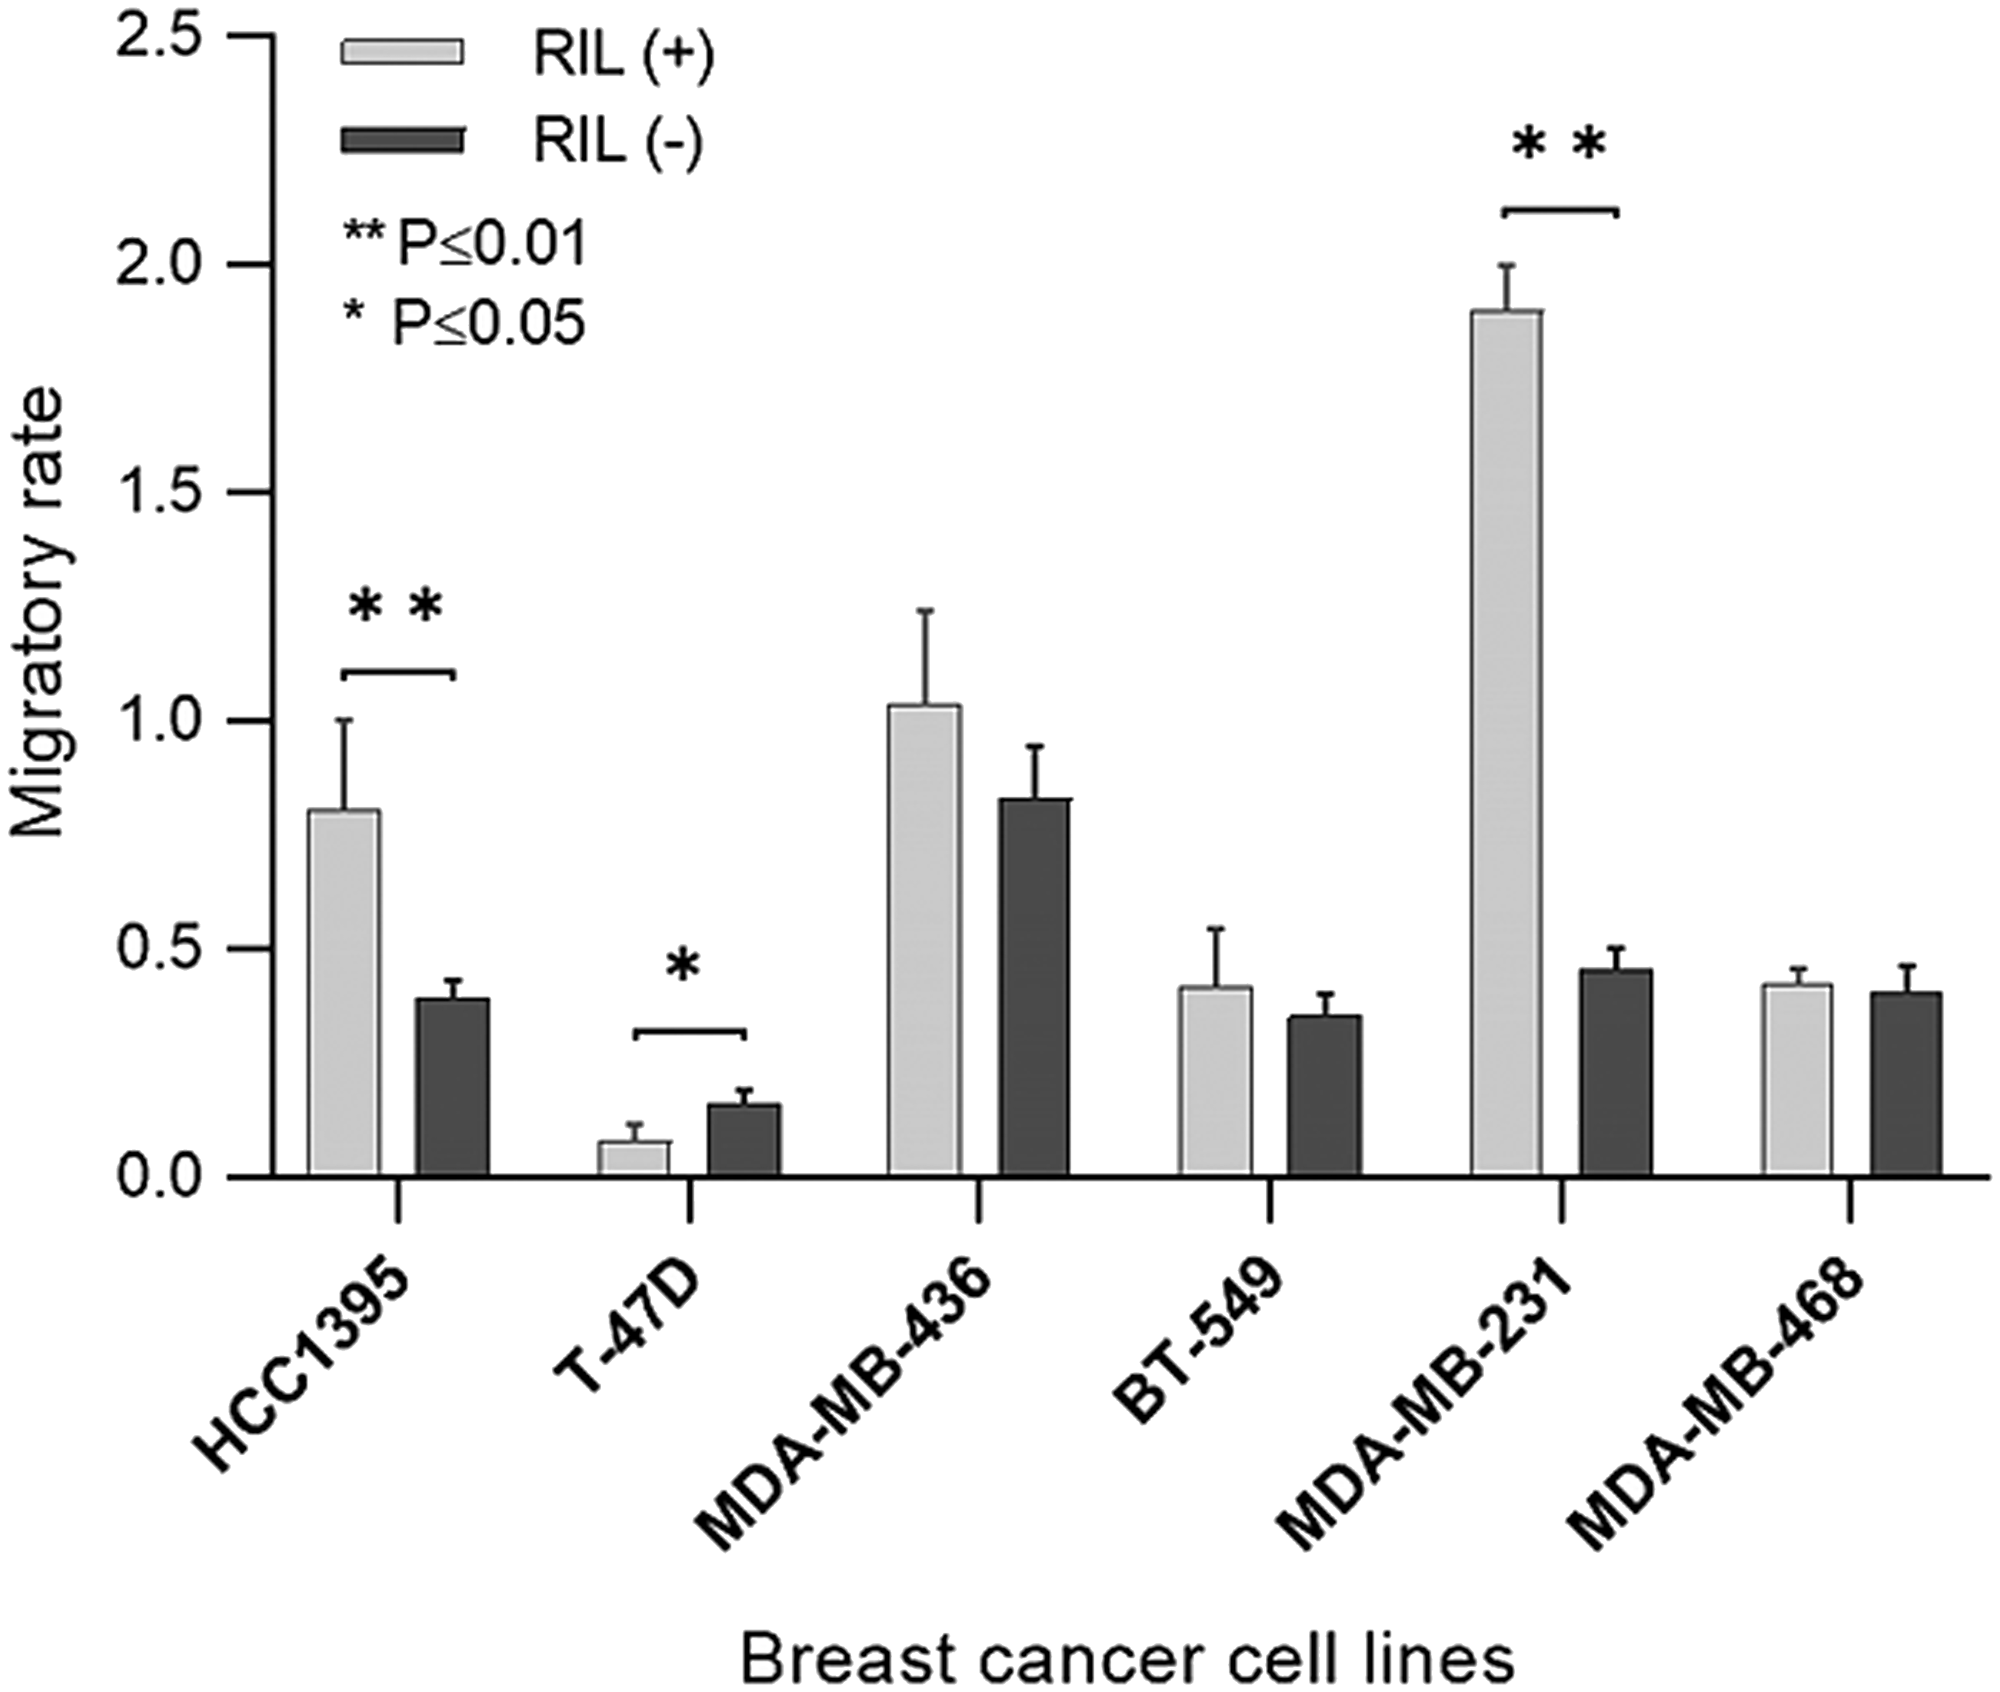 The migratory activity of the transgenic RIL (+) and RIL (-) cells throughout the panel of breast cancer cell lines.